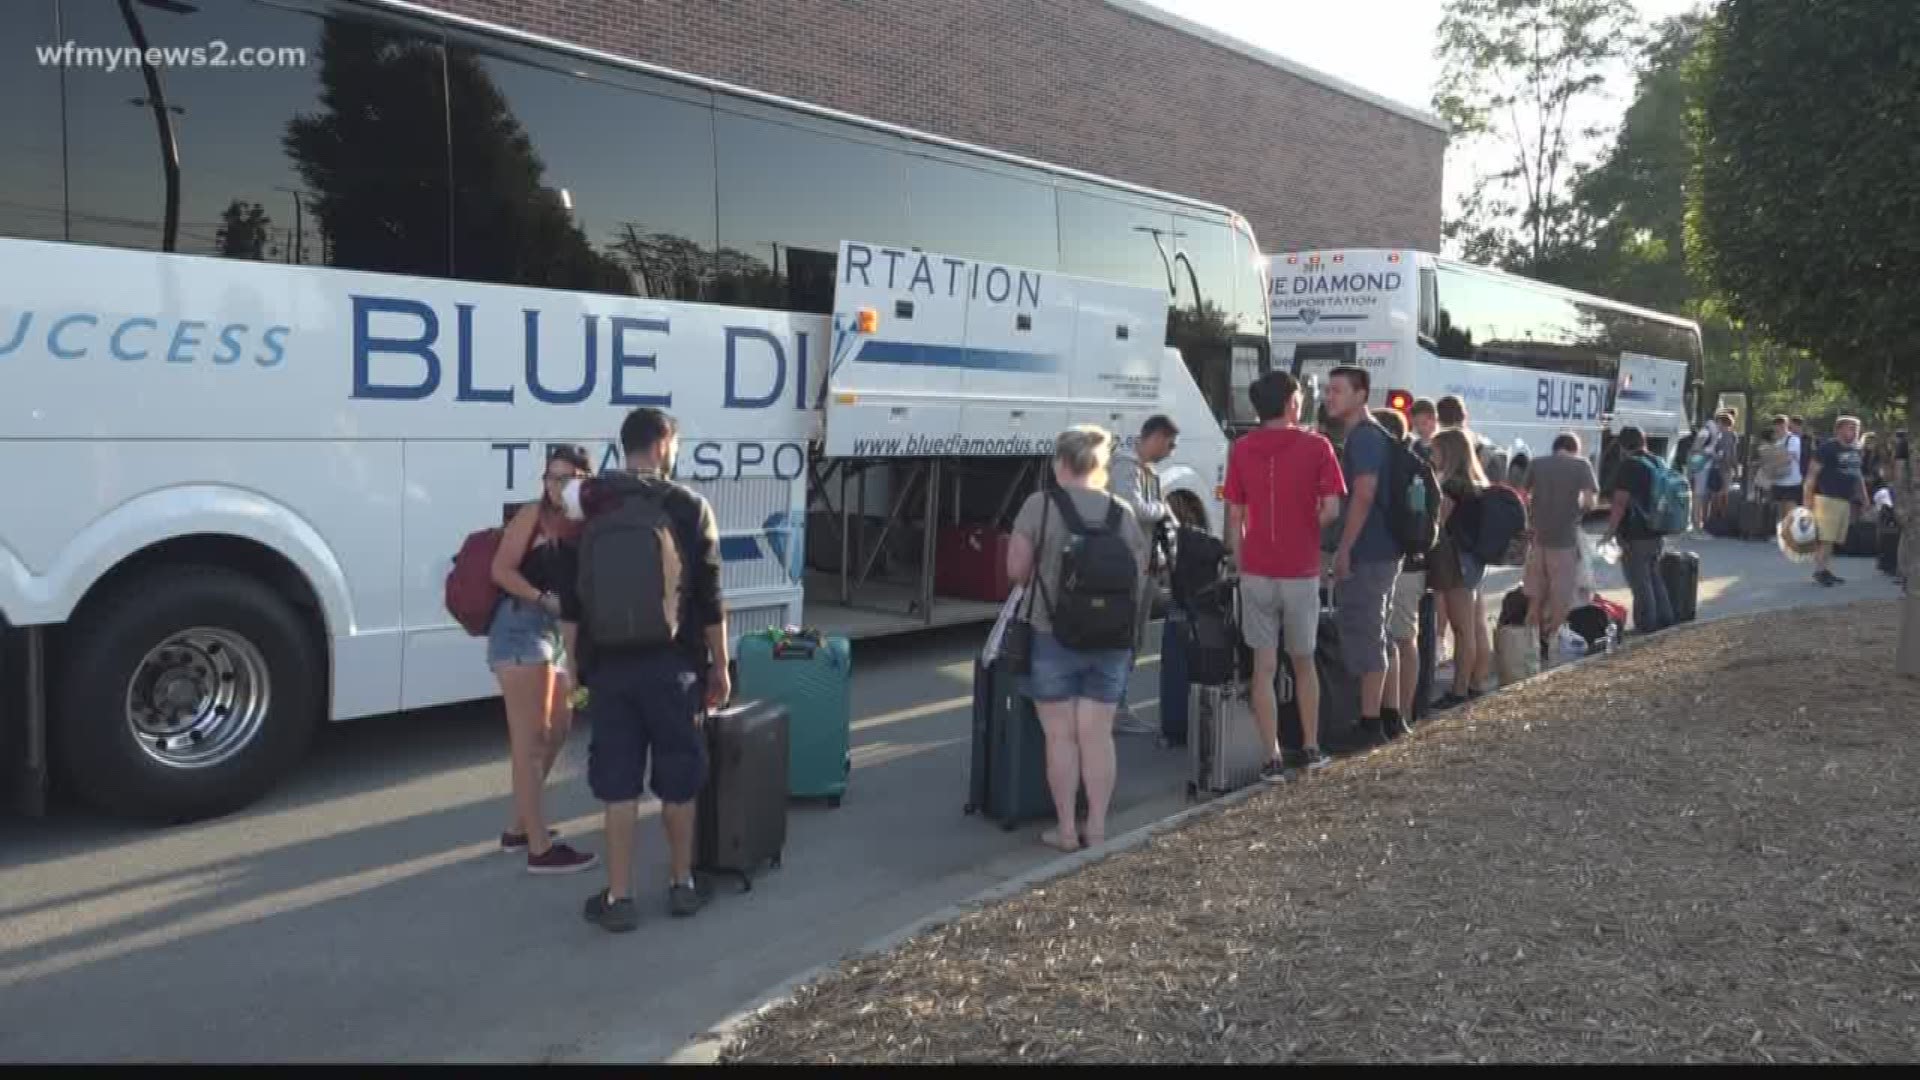 Students from the University of North Carolina Wilmington got on a bus and drove to the Greensboro to escape the storm. Officials at UNC-Greensboro helped make it happen.